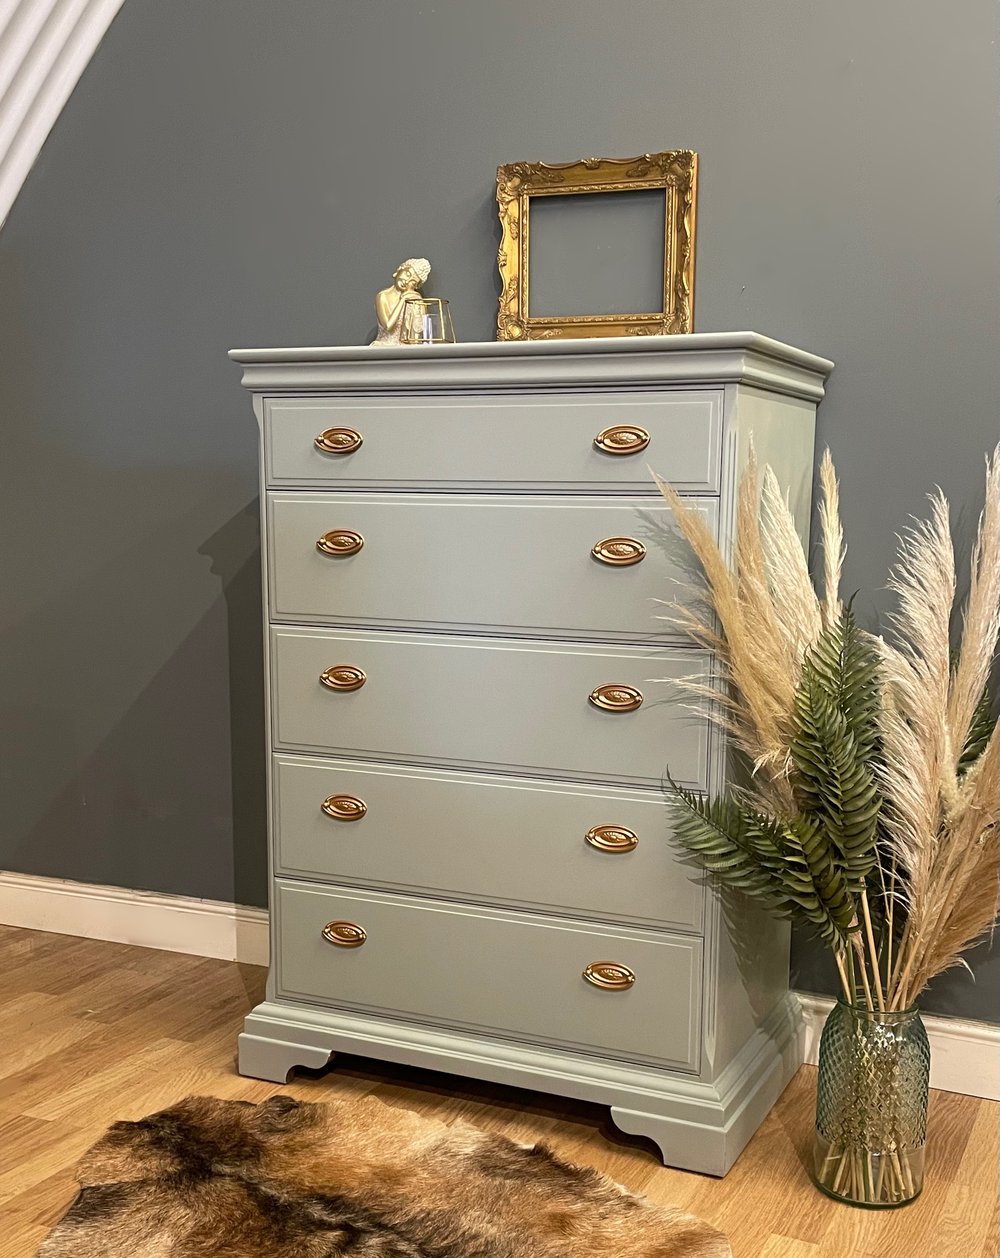 Image of A beautiful tallboy chest of drawers painted in Farrow and Ball